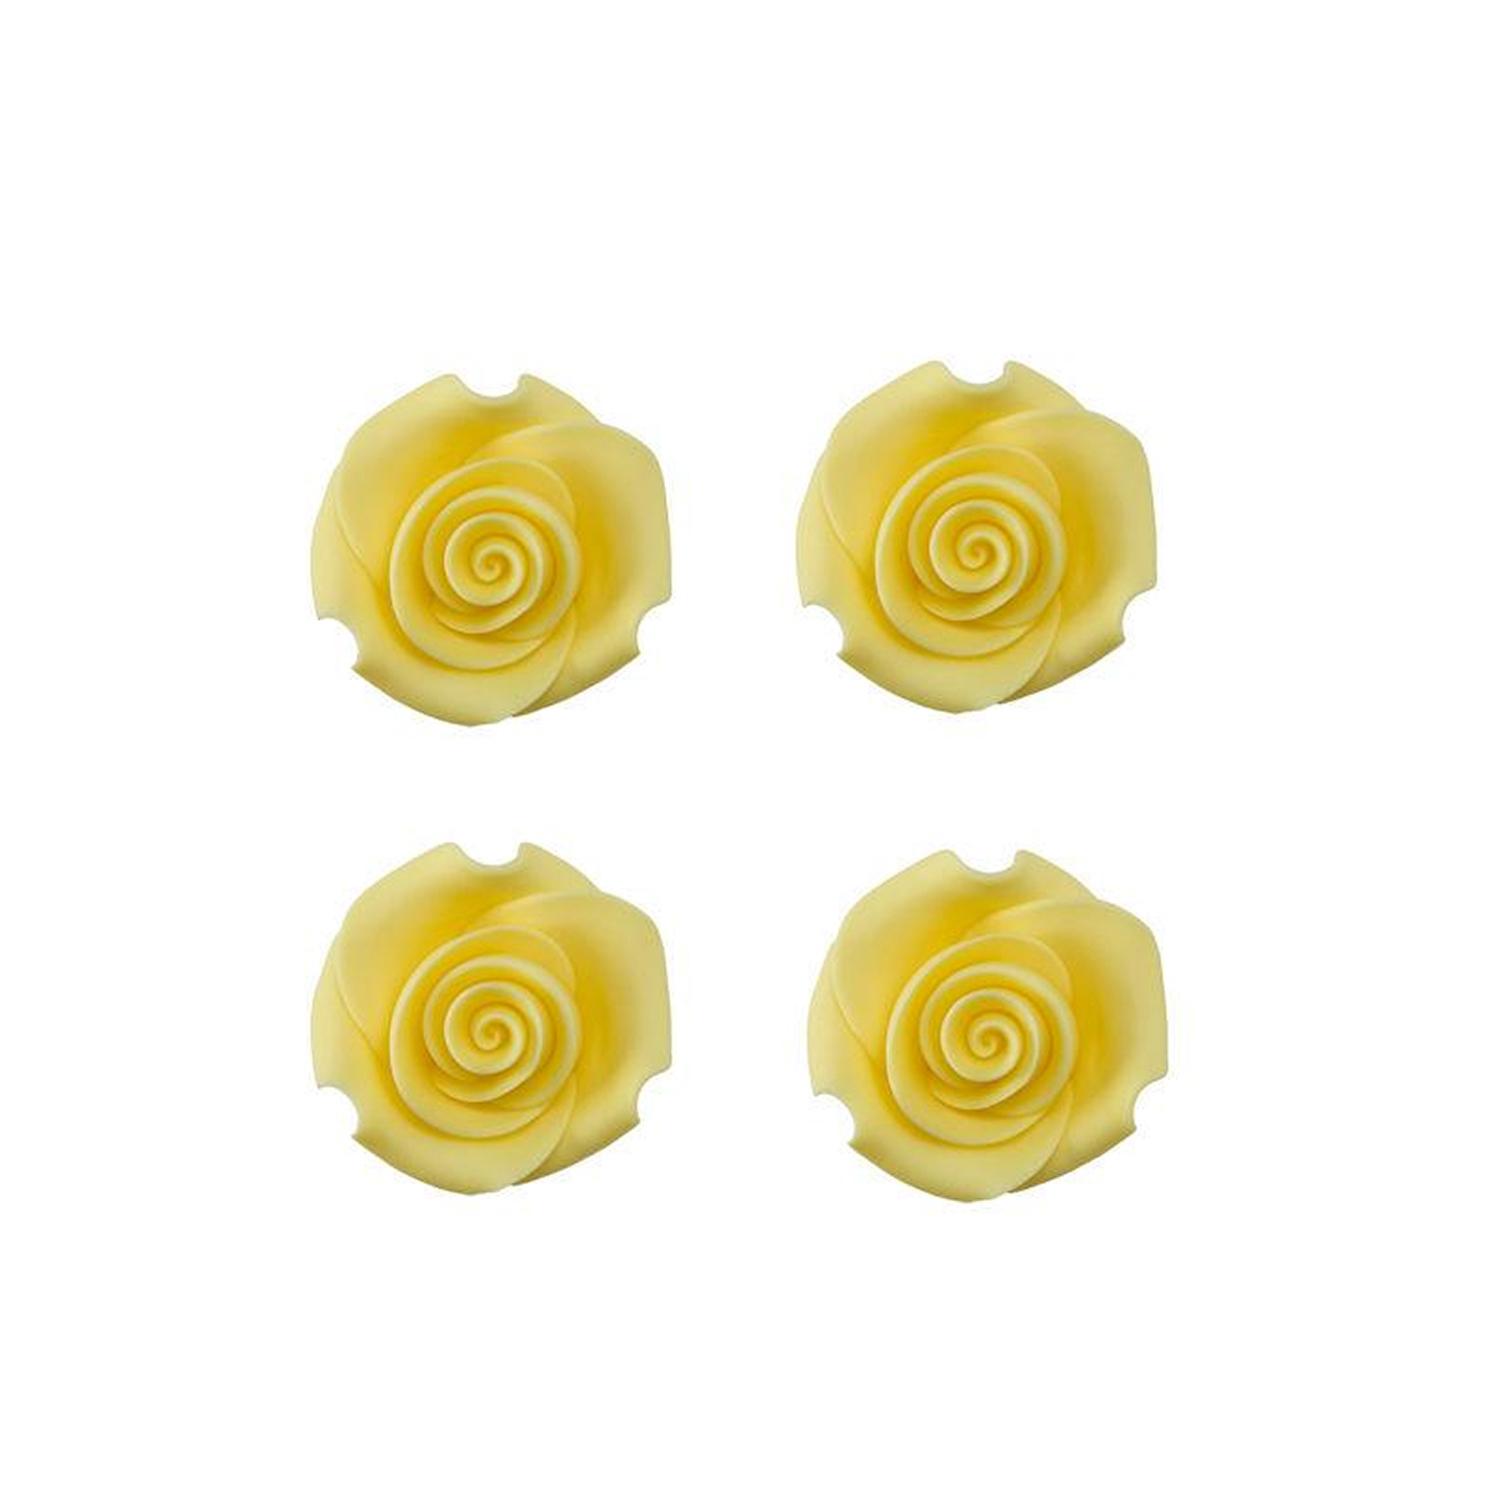 SUPER CAKES SMALL ROSE FLOWERS YELLOW